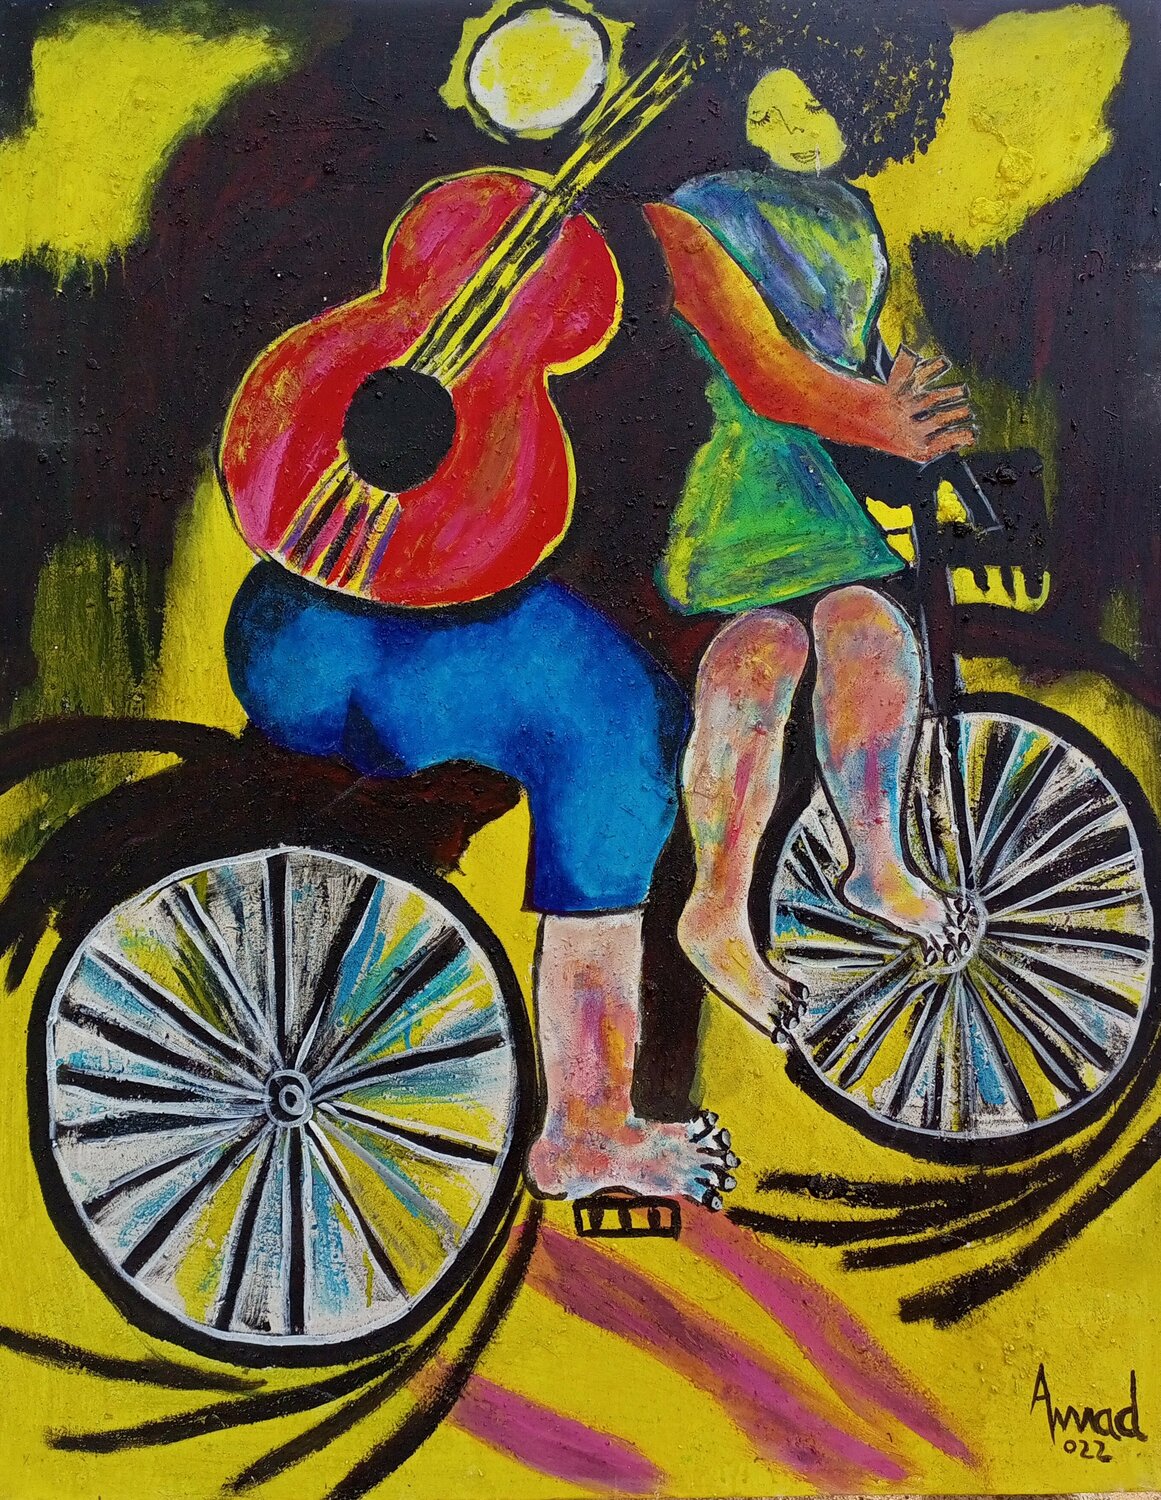 benzine Havoc Spit Lovers on bicycle painting, Abstract paintings on canvas, Abstracte kunst, Abstracte  schilderijen, Abstract schilderij, Kunst auf leinwand by Jafeth Moiane  (2022) : Painting Acrylic, Oil on Canvas - SINGULART